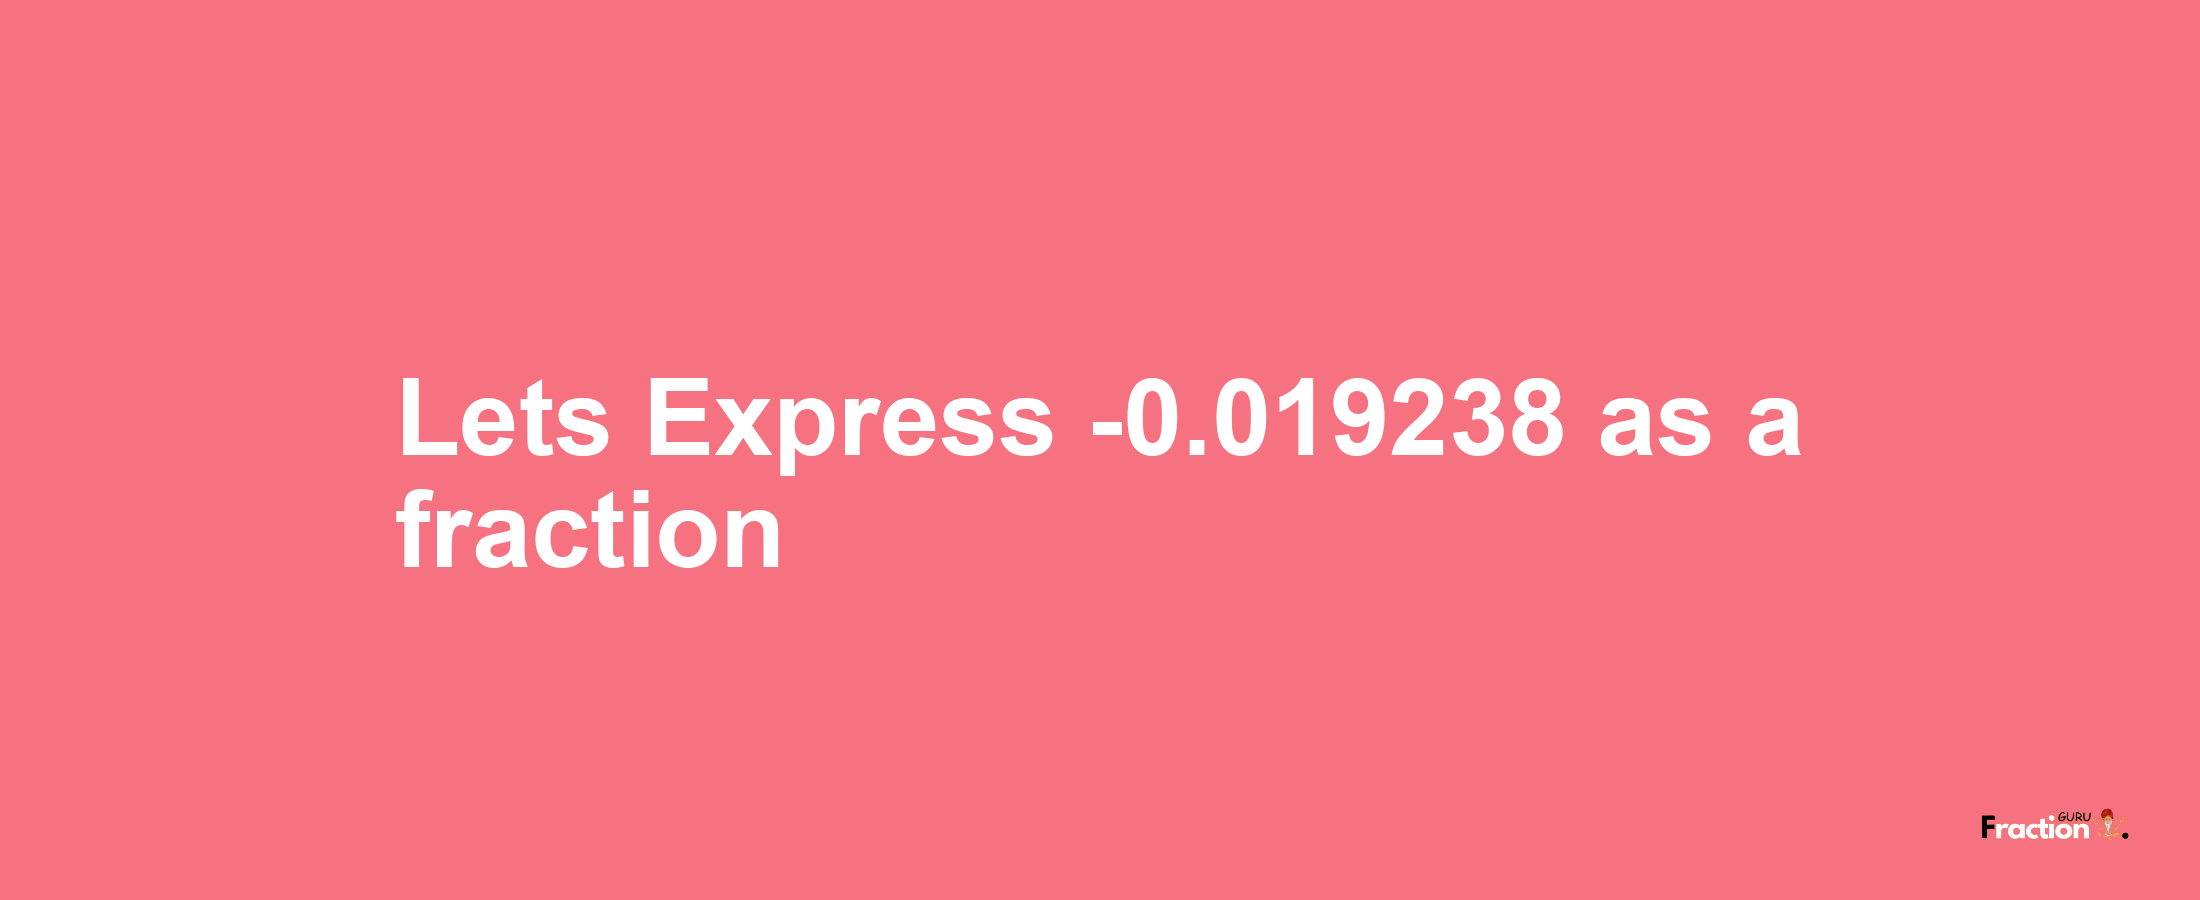 Lets Express -0.019238 as afraction